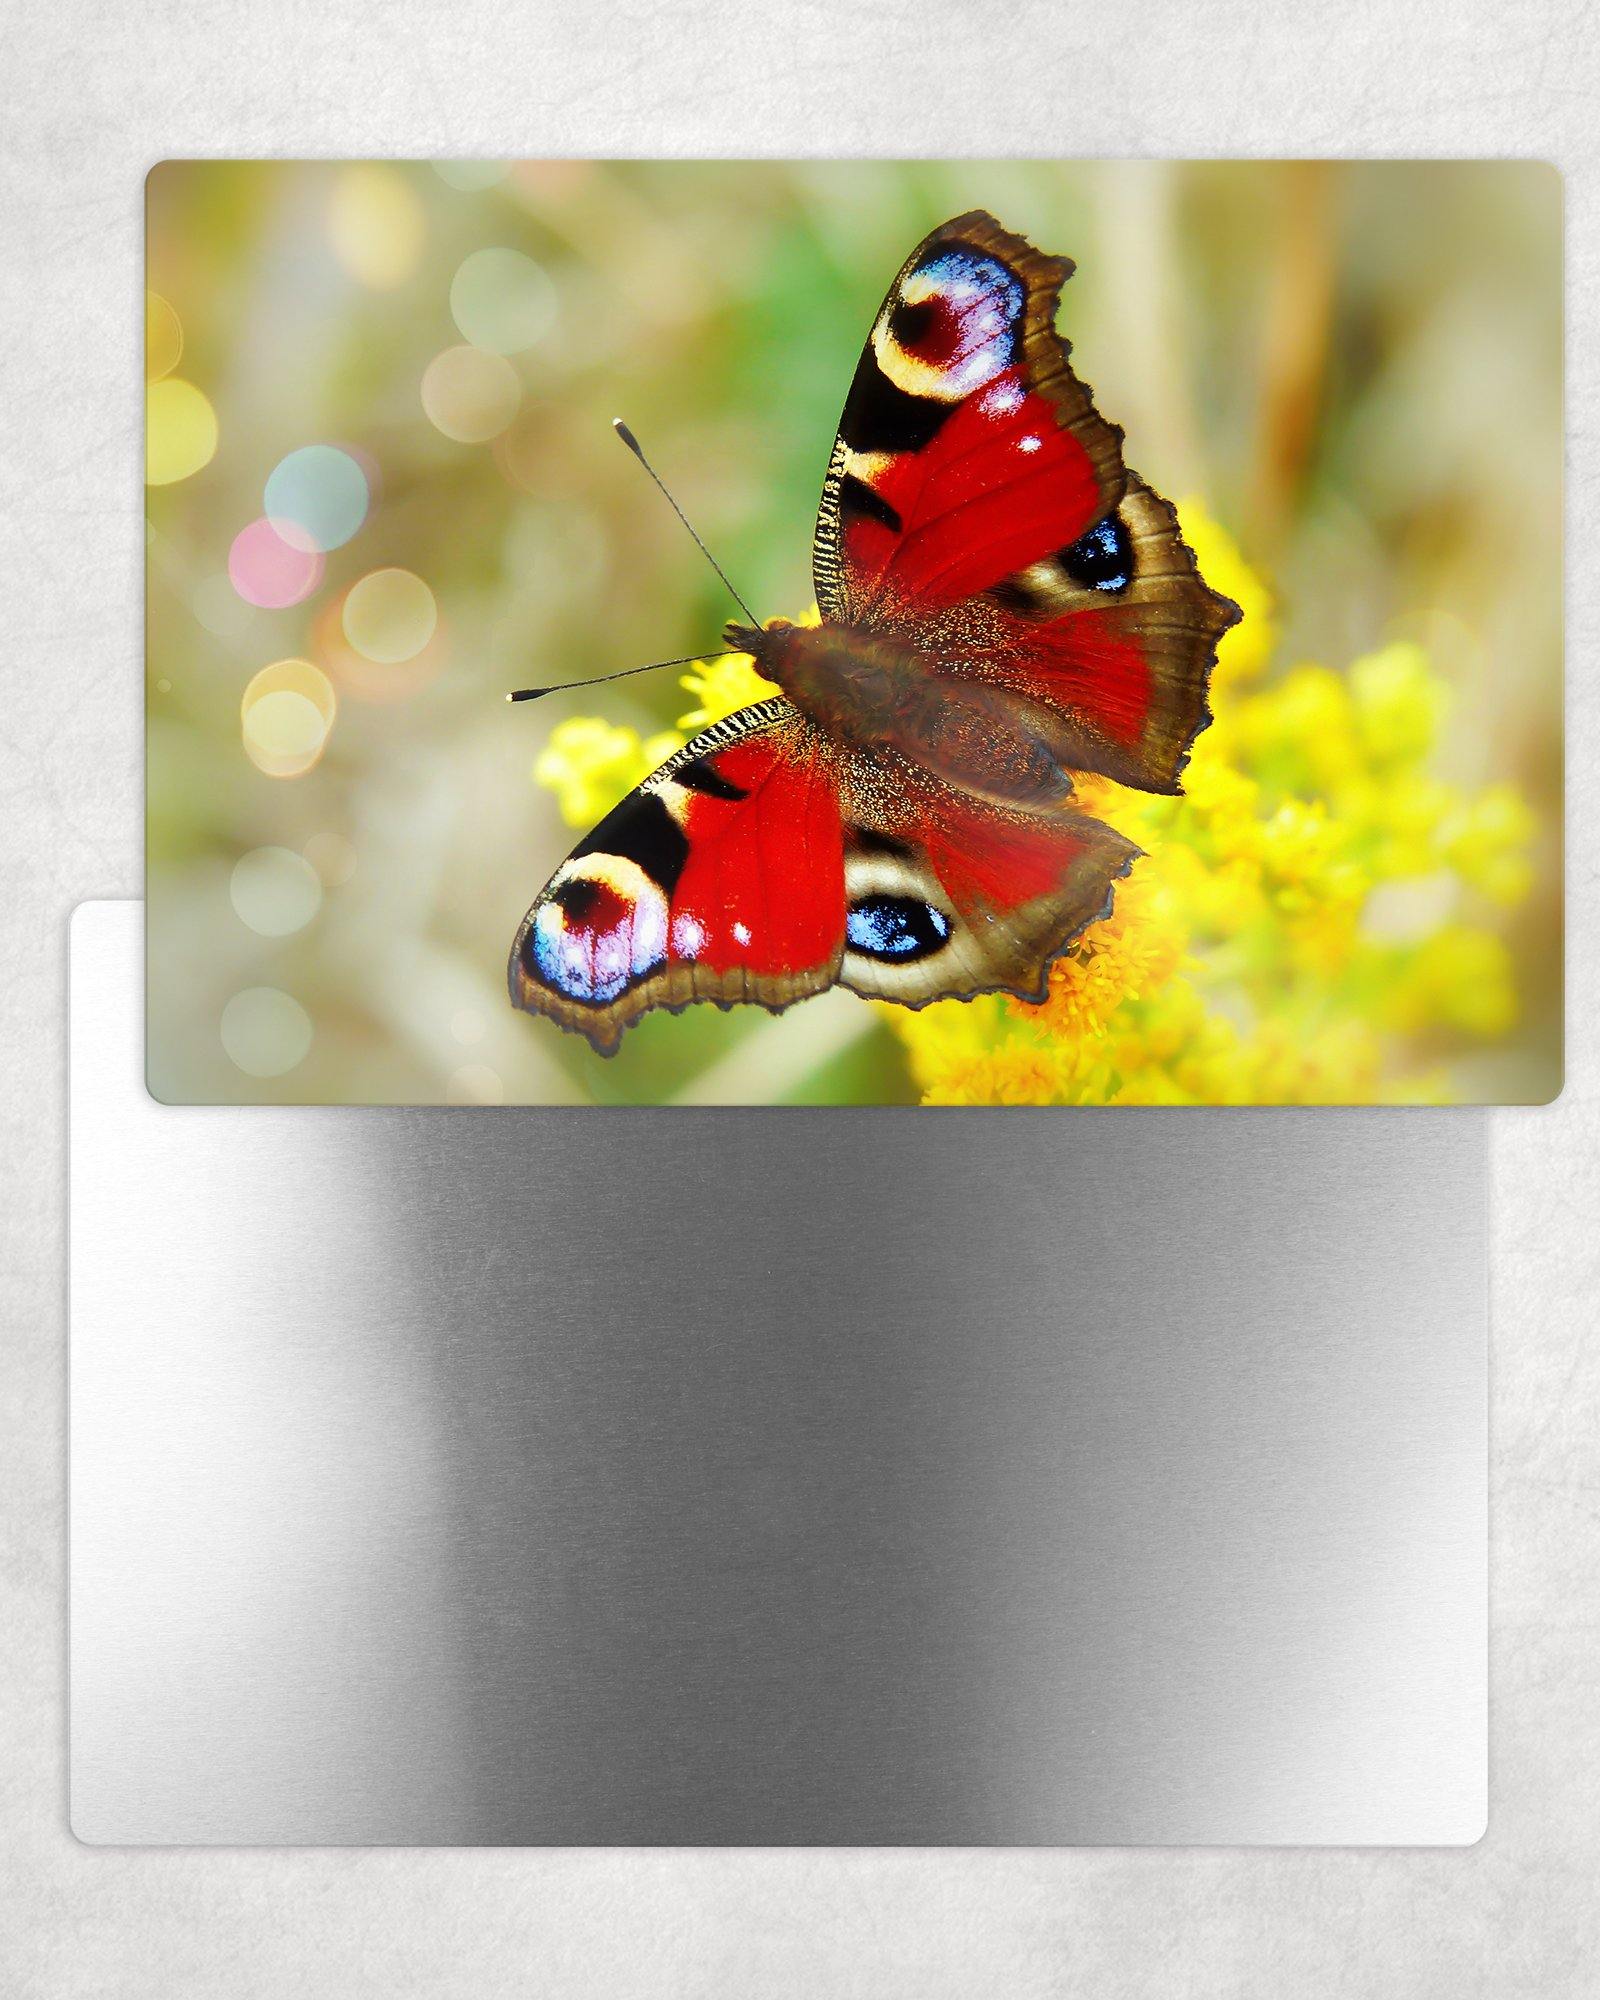 Peacock Butterfly Metal Photo Panel - 8x12 or 12x18 - Schoppix Gifts